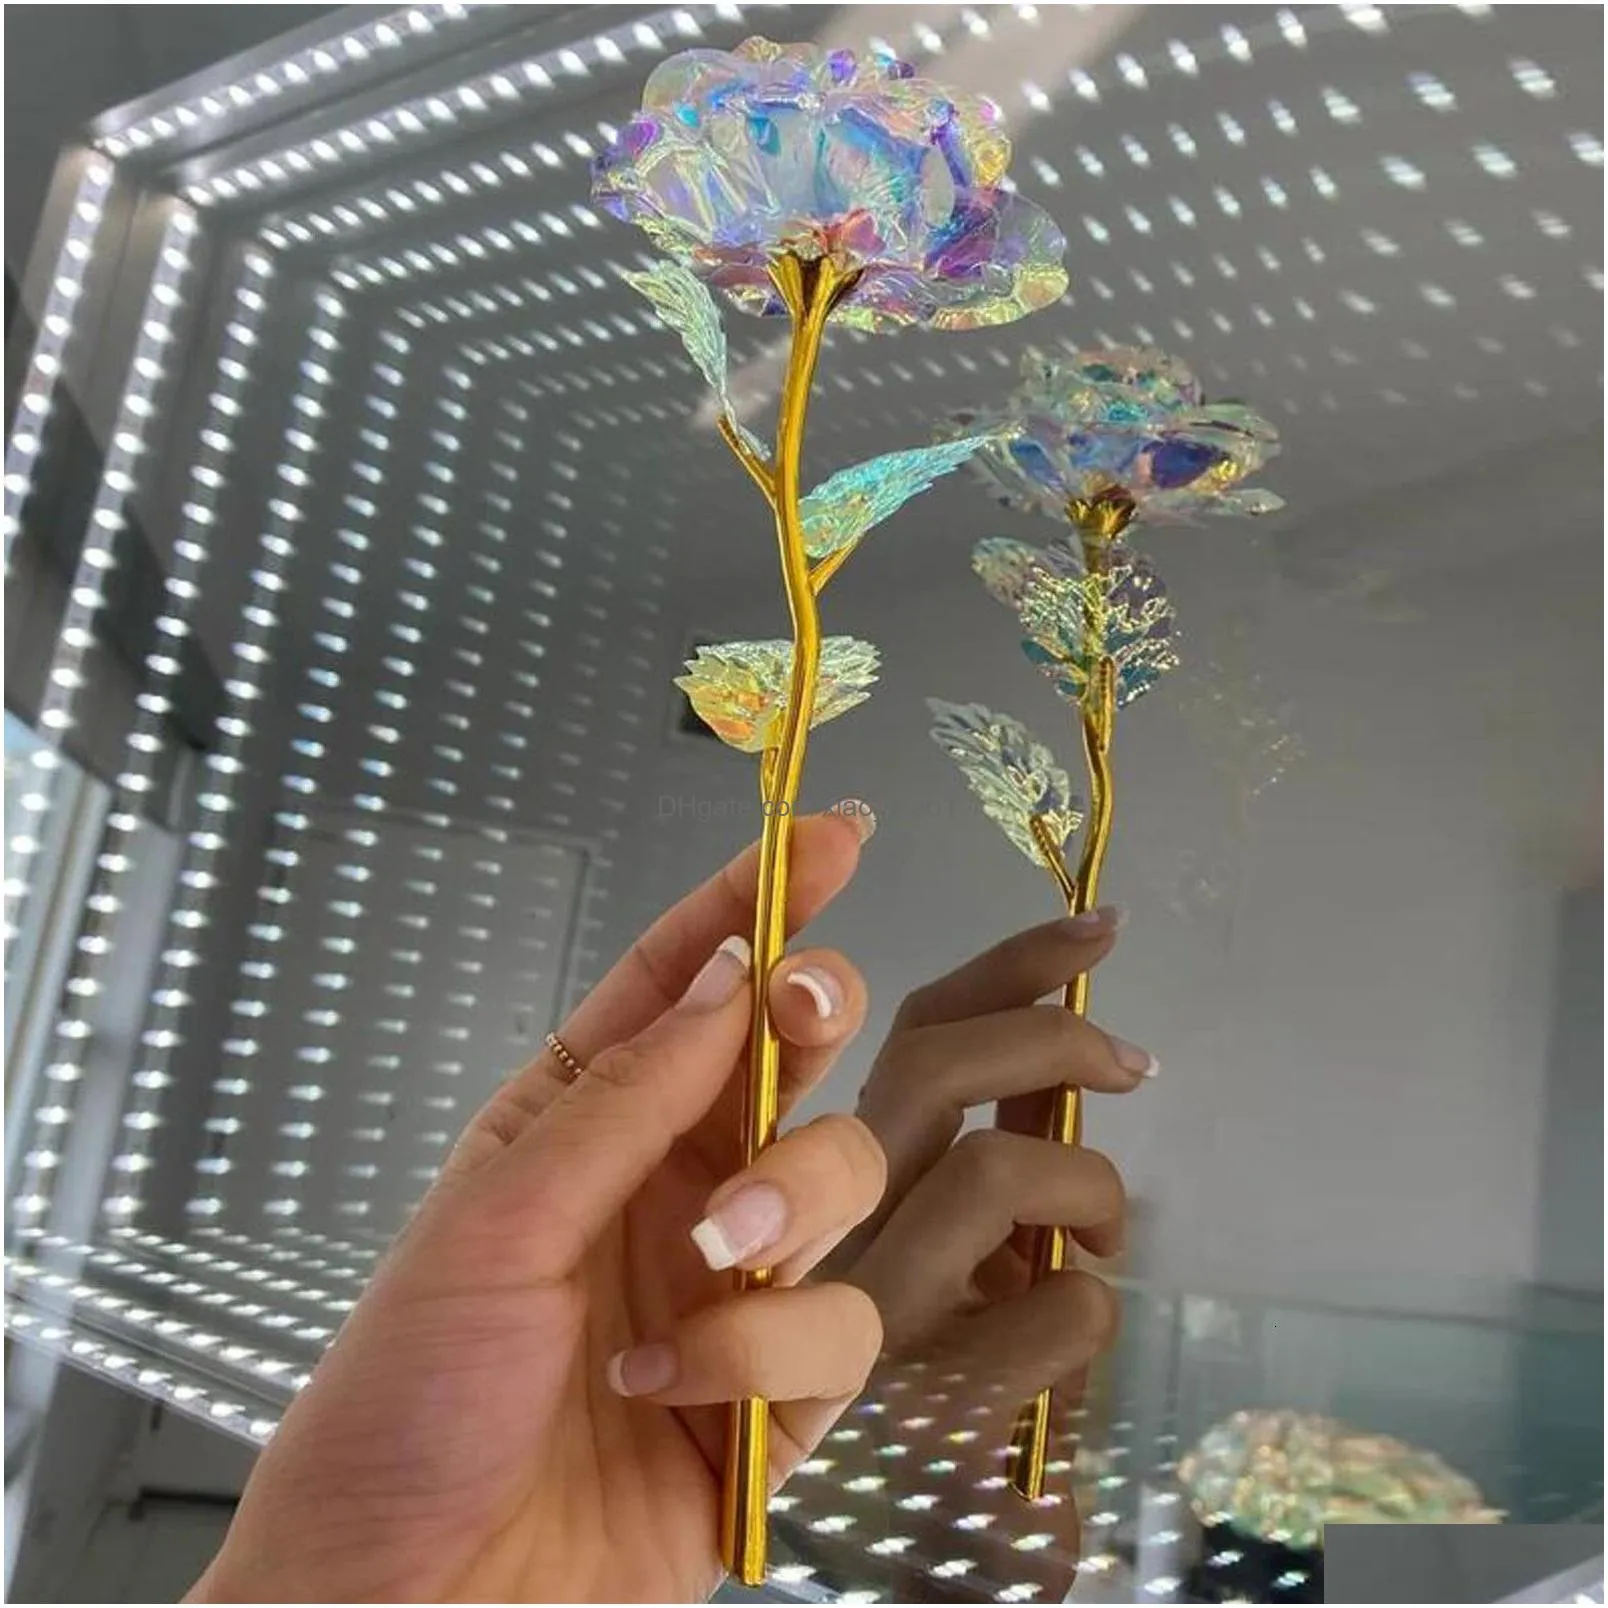 faux floral greenery 10pcs colorful galaxy artificial rose flowers bouquet for home wedding decoration indoor gift valentines day